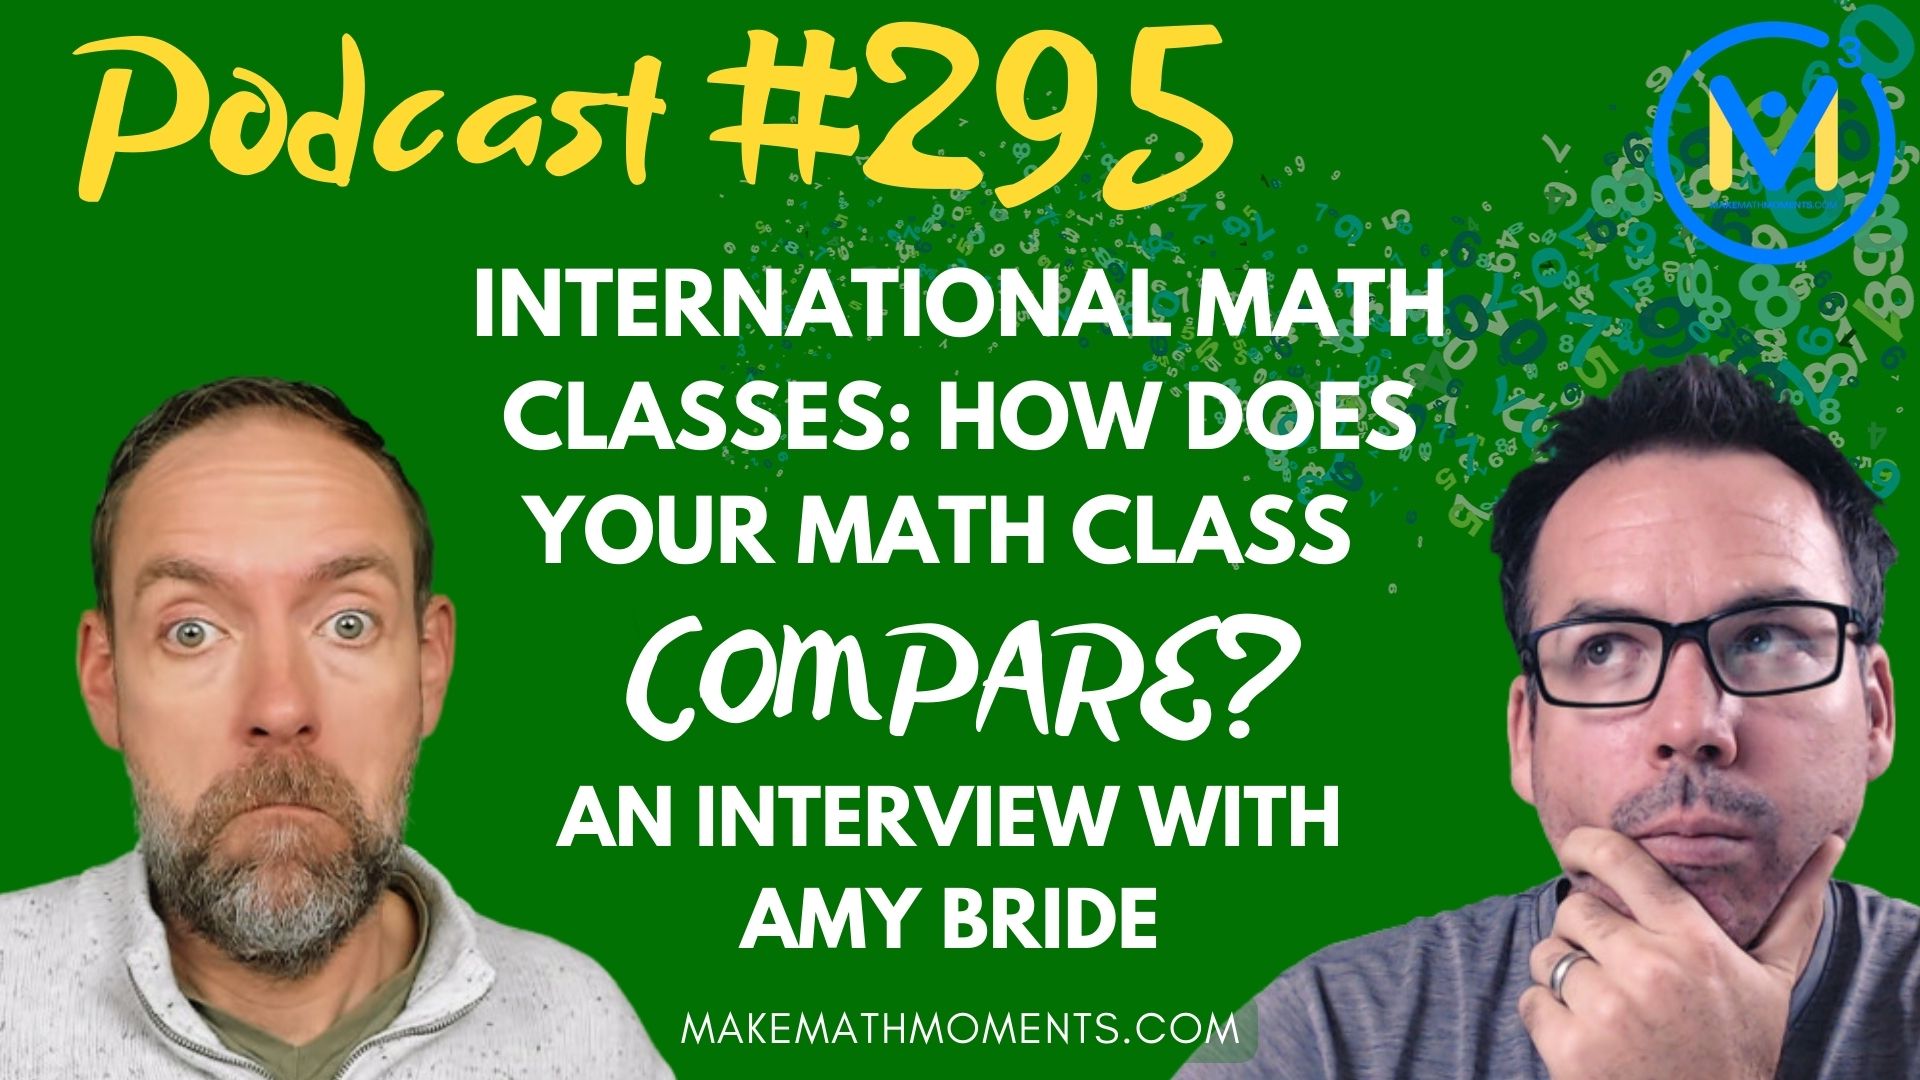 Episode #295: International Math Classes: How Does Your Math Class Compare? – An Interview with Amy Bride 